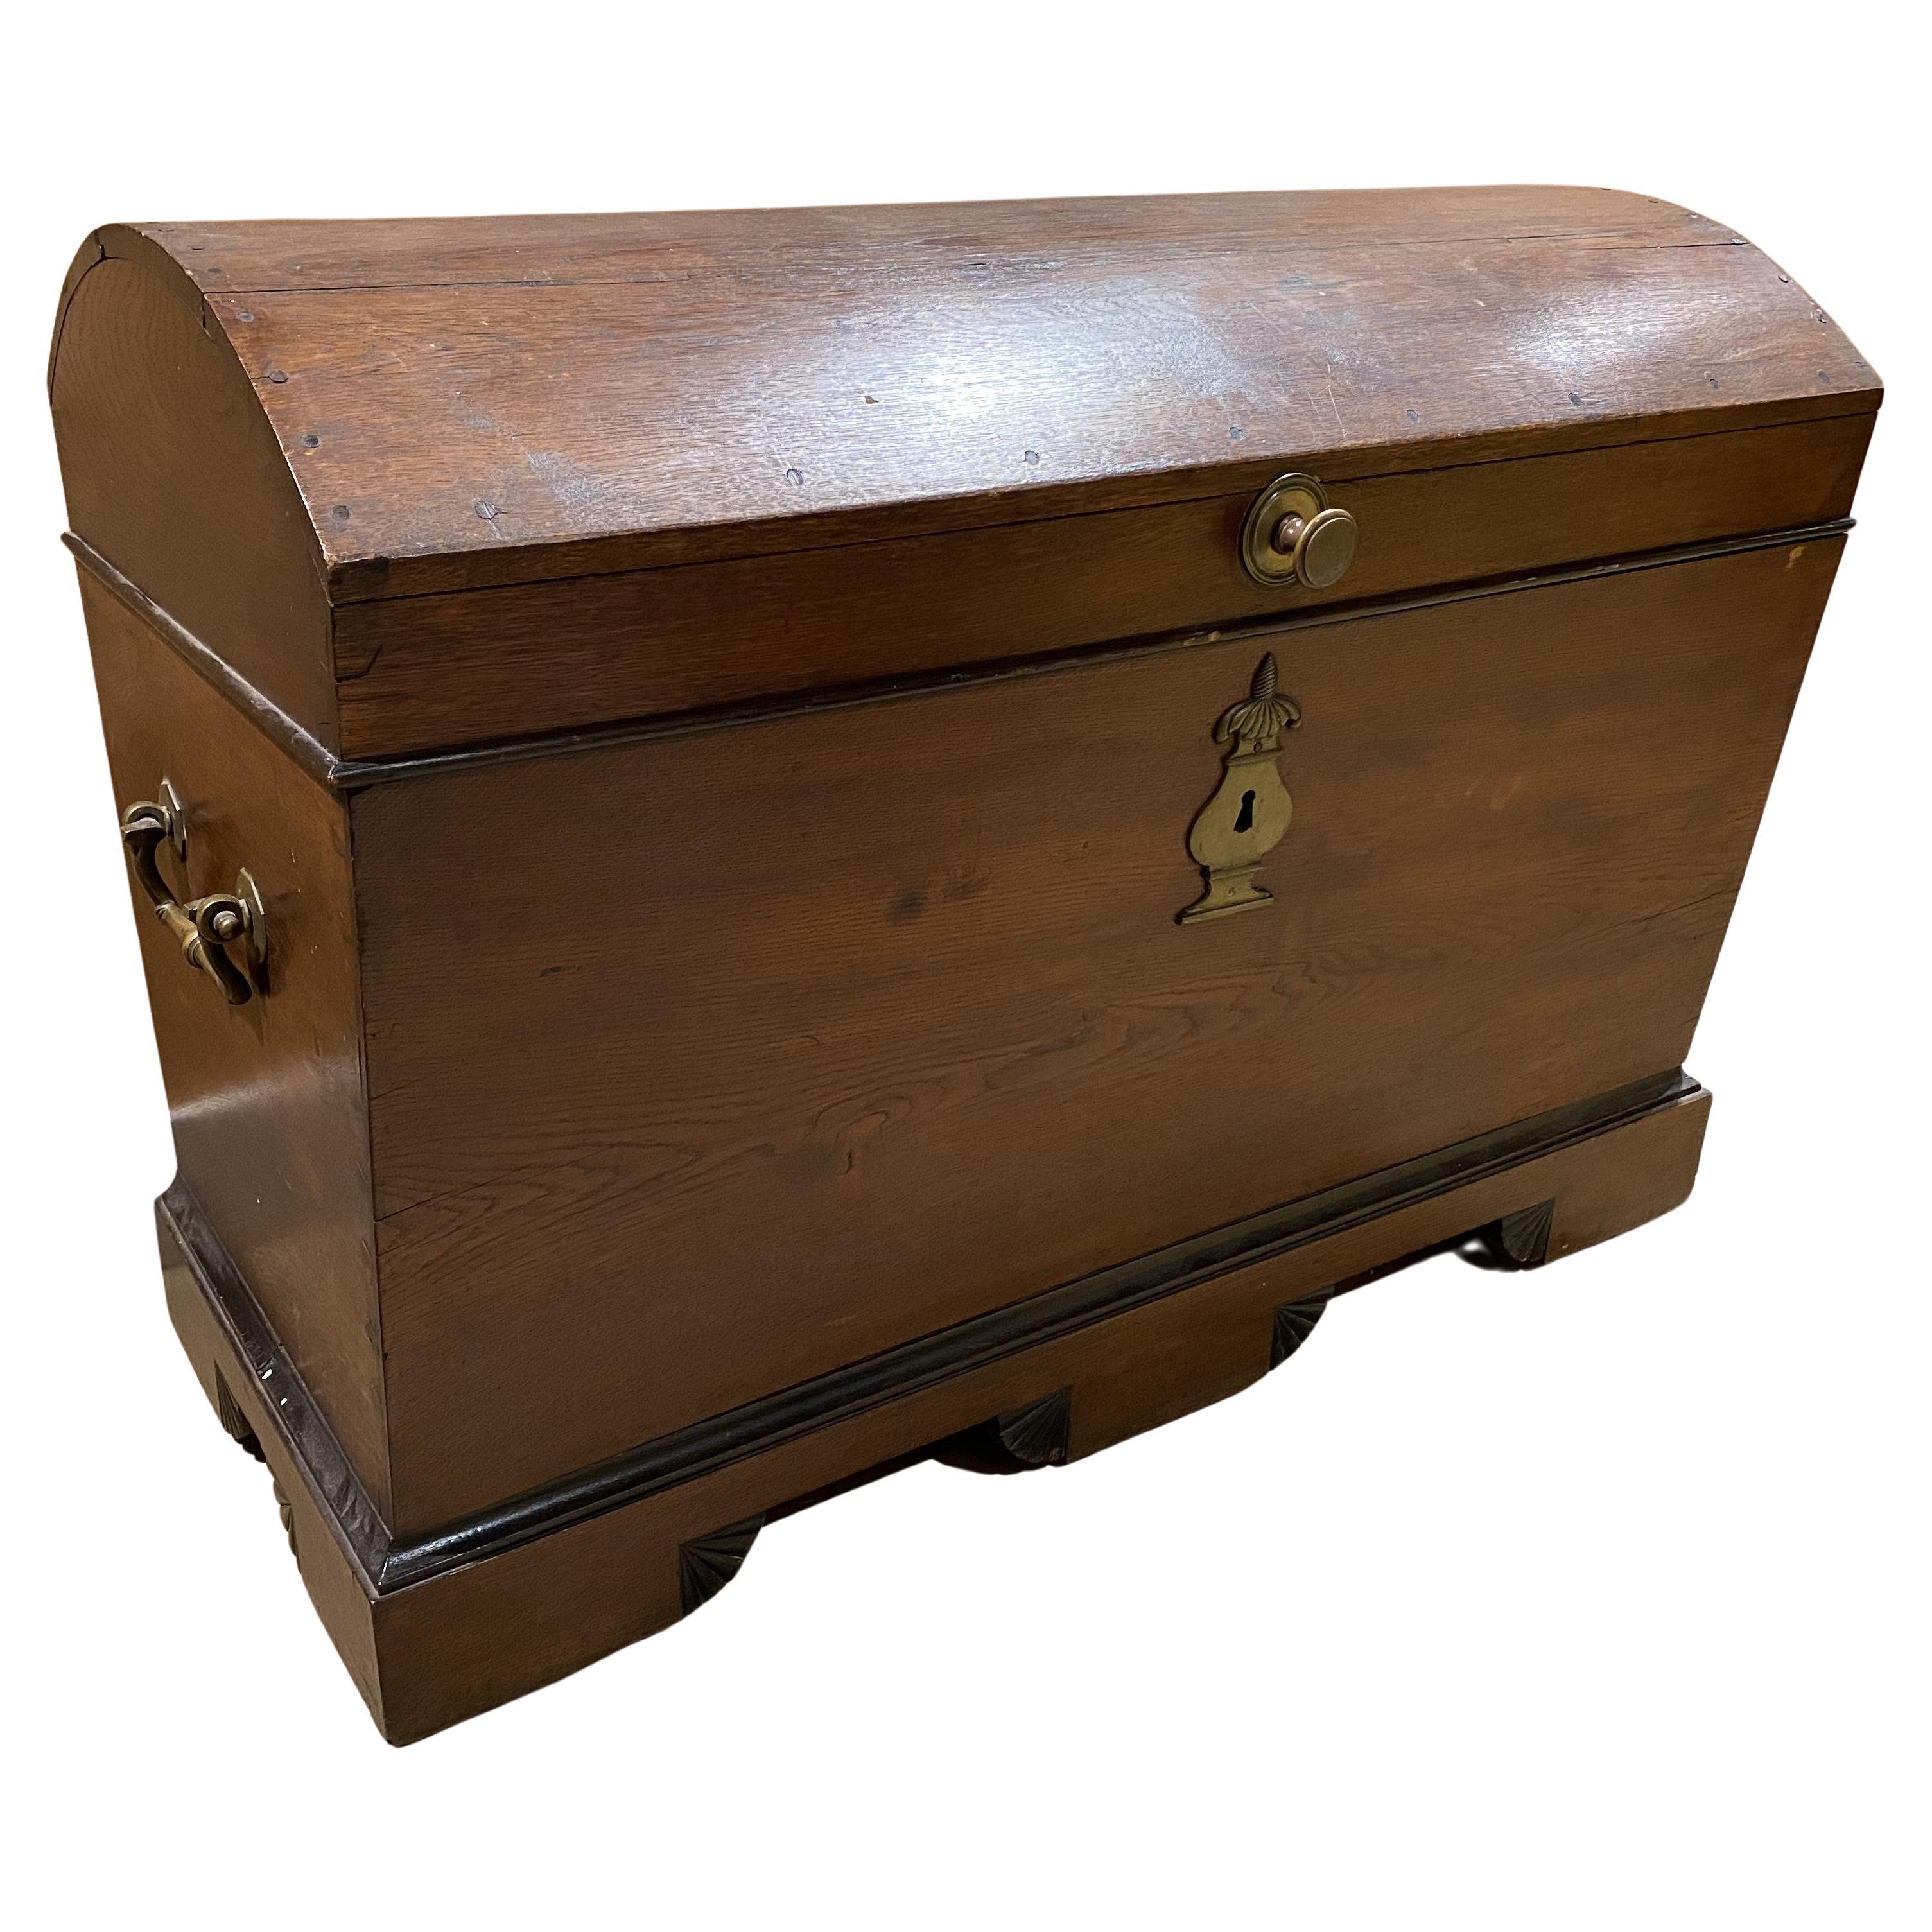 18th/19th c European Oak Dome Top Trunk with Carved Shell Decoration For Sale